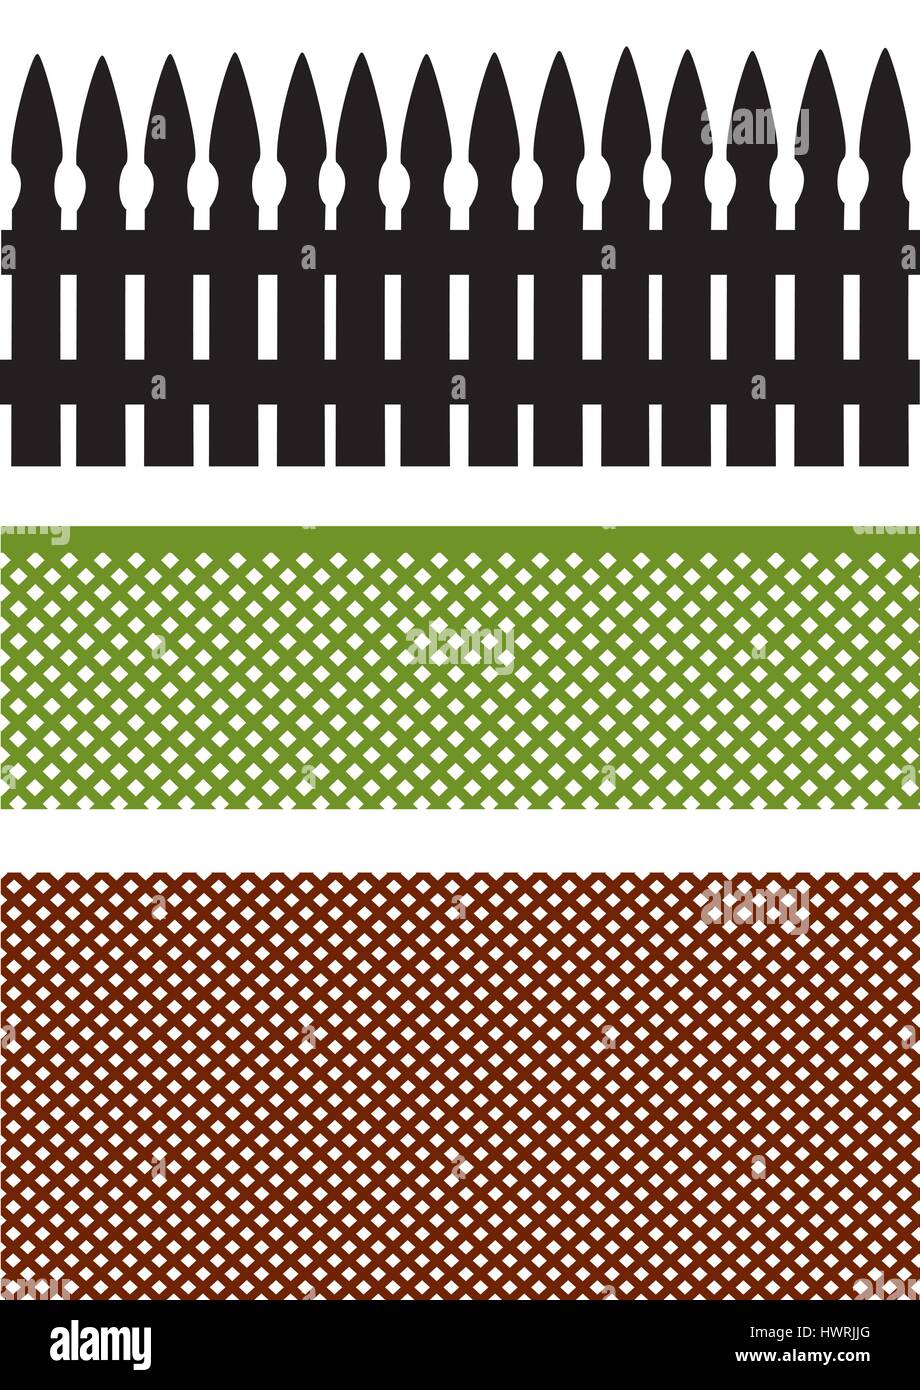 a set of three different fences black green and brown Stock Vector